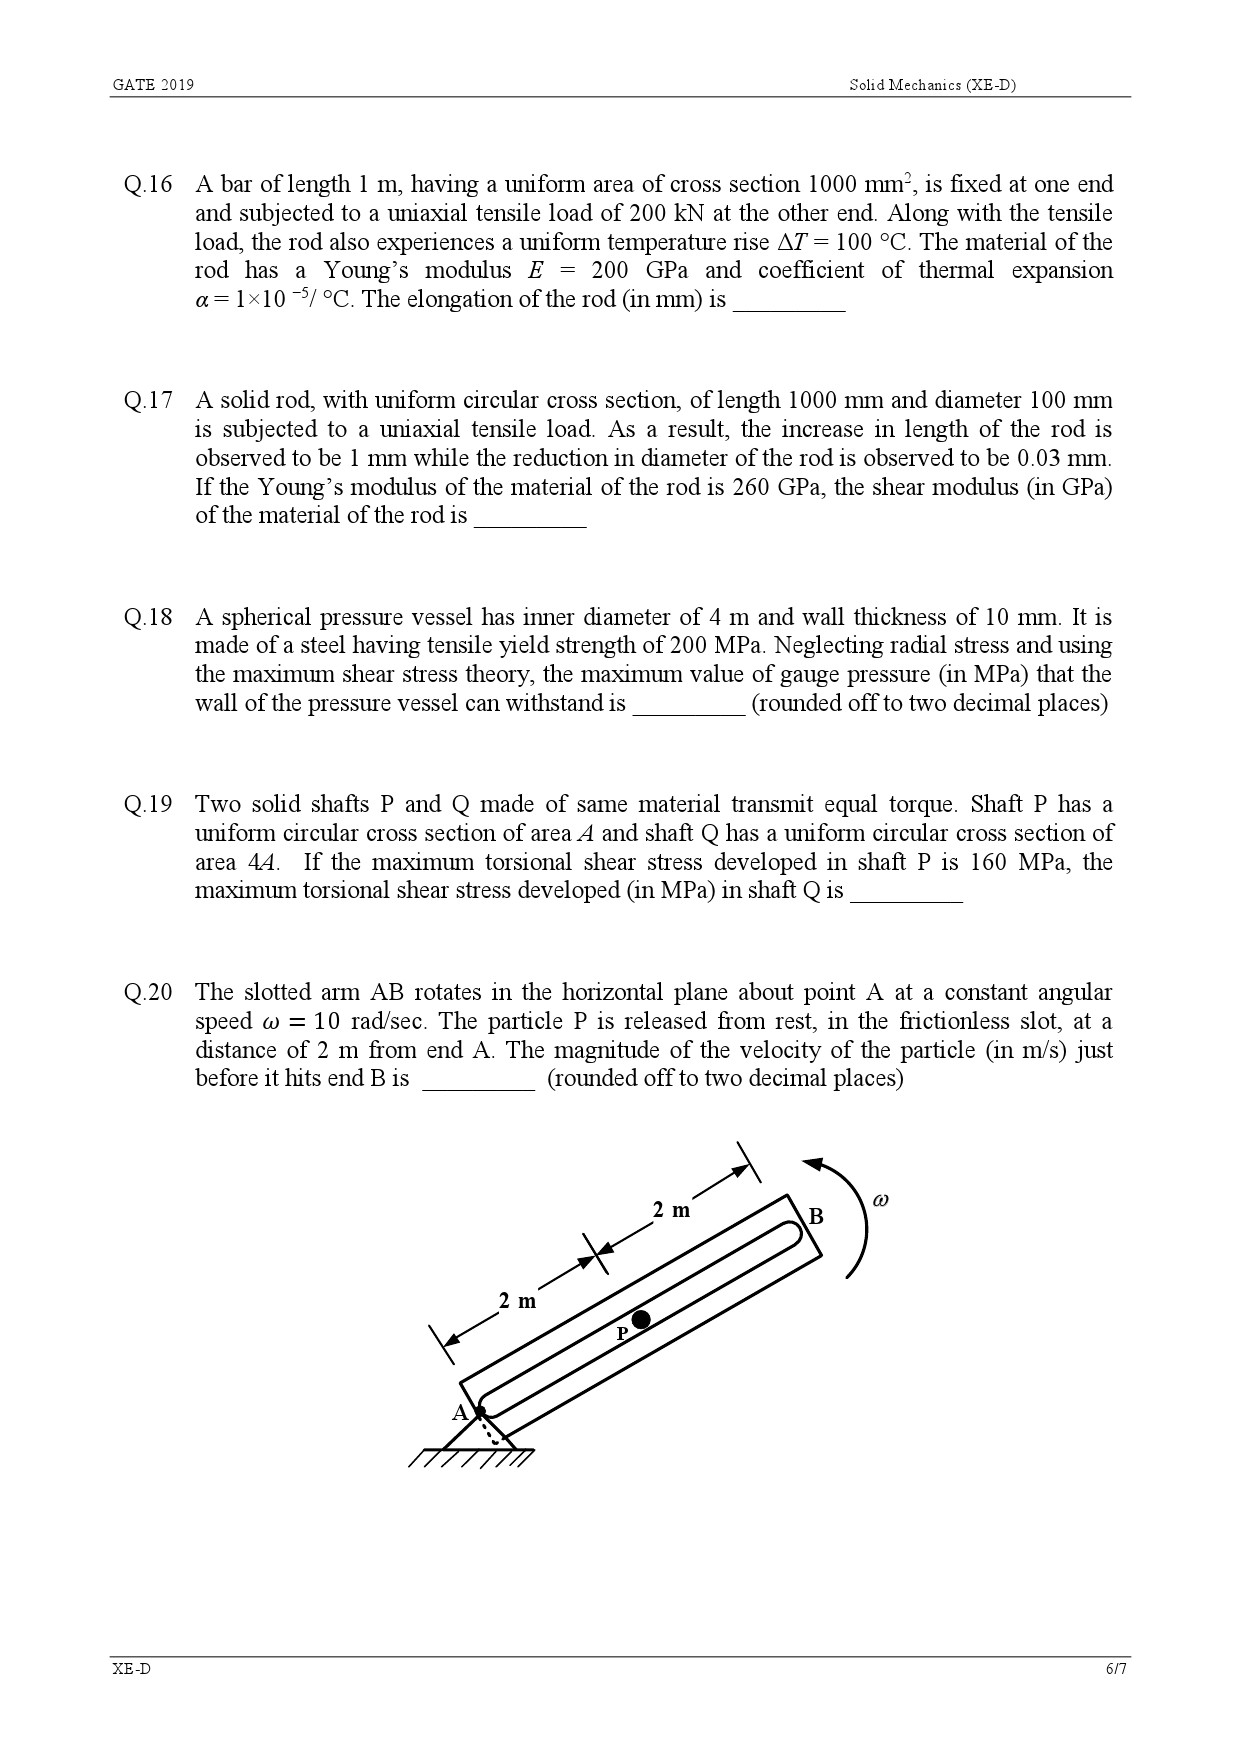 GATE Exam Question Paper 2019 Engineering Sciences 21